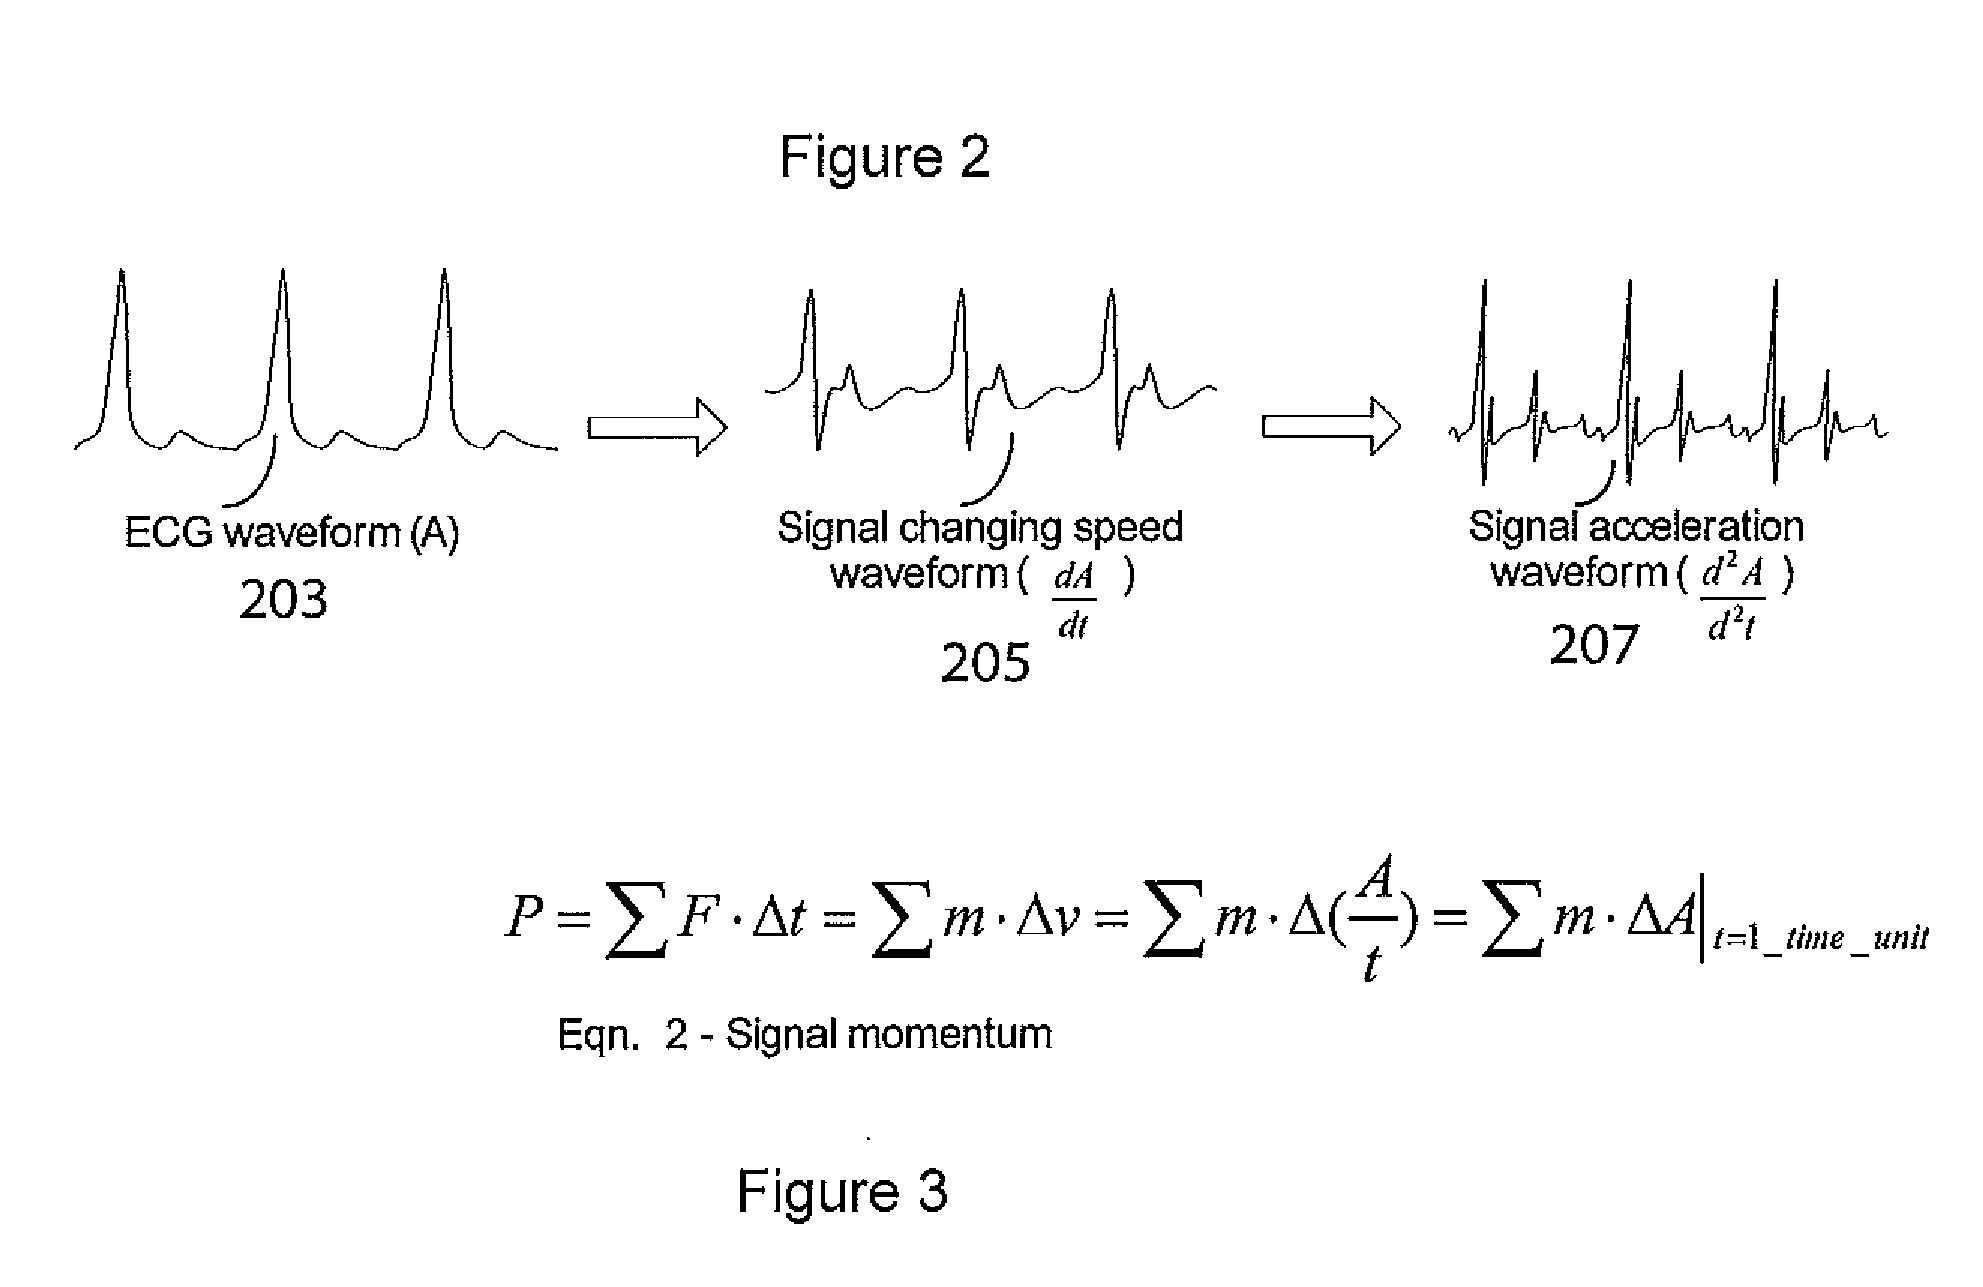 System for Heart Performance Characterization and Abnormality Detection